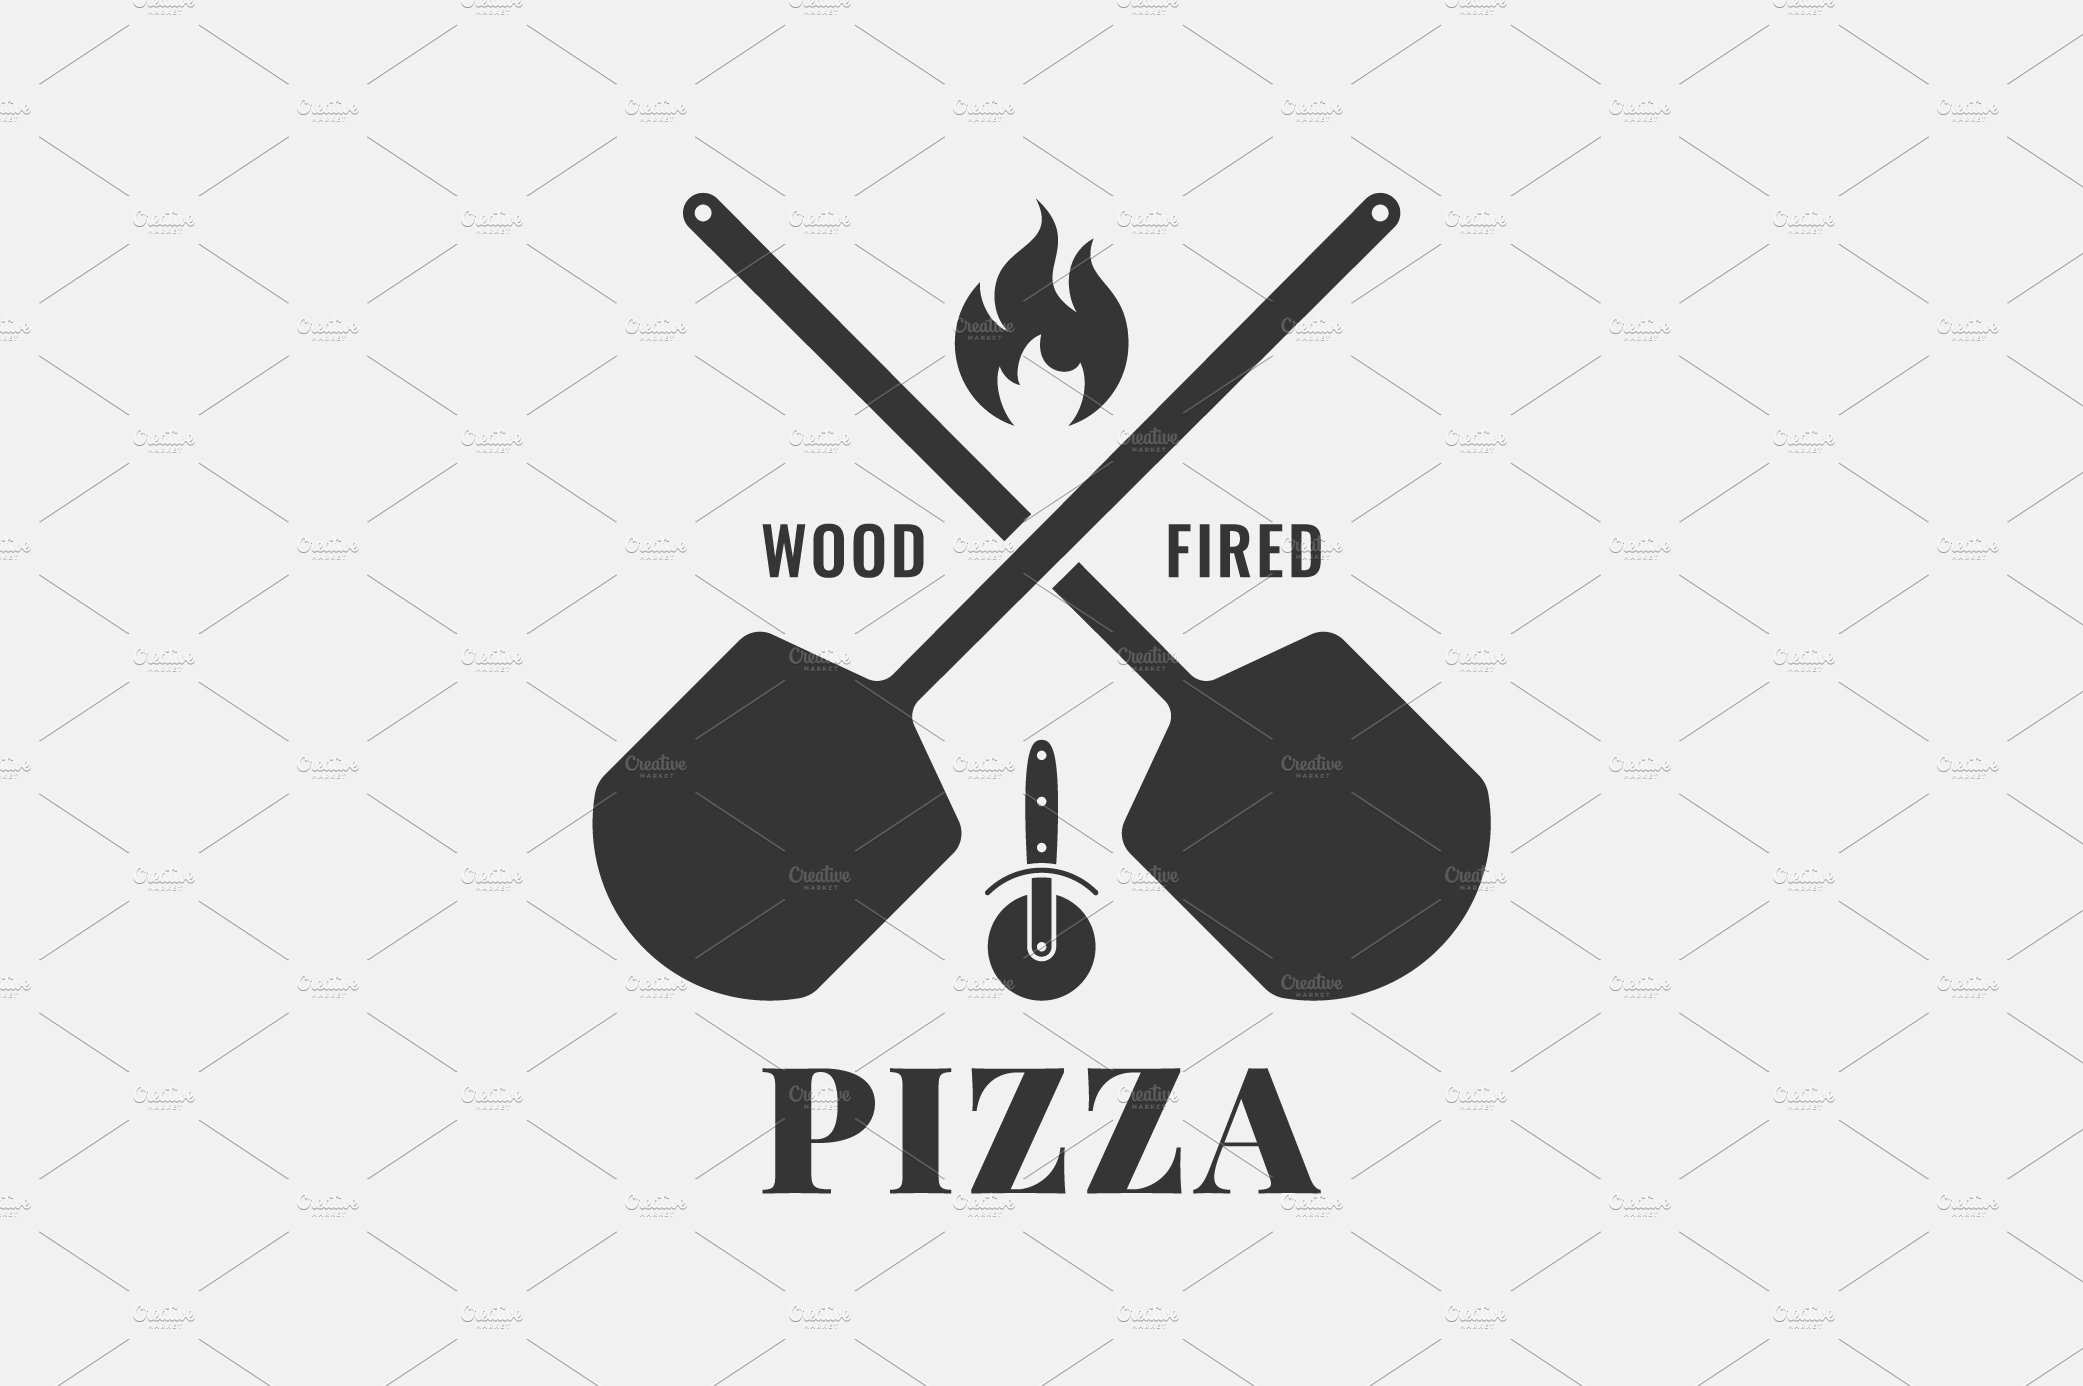 Pizza logo with oven shovel. cover image.